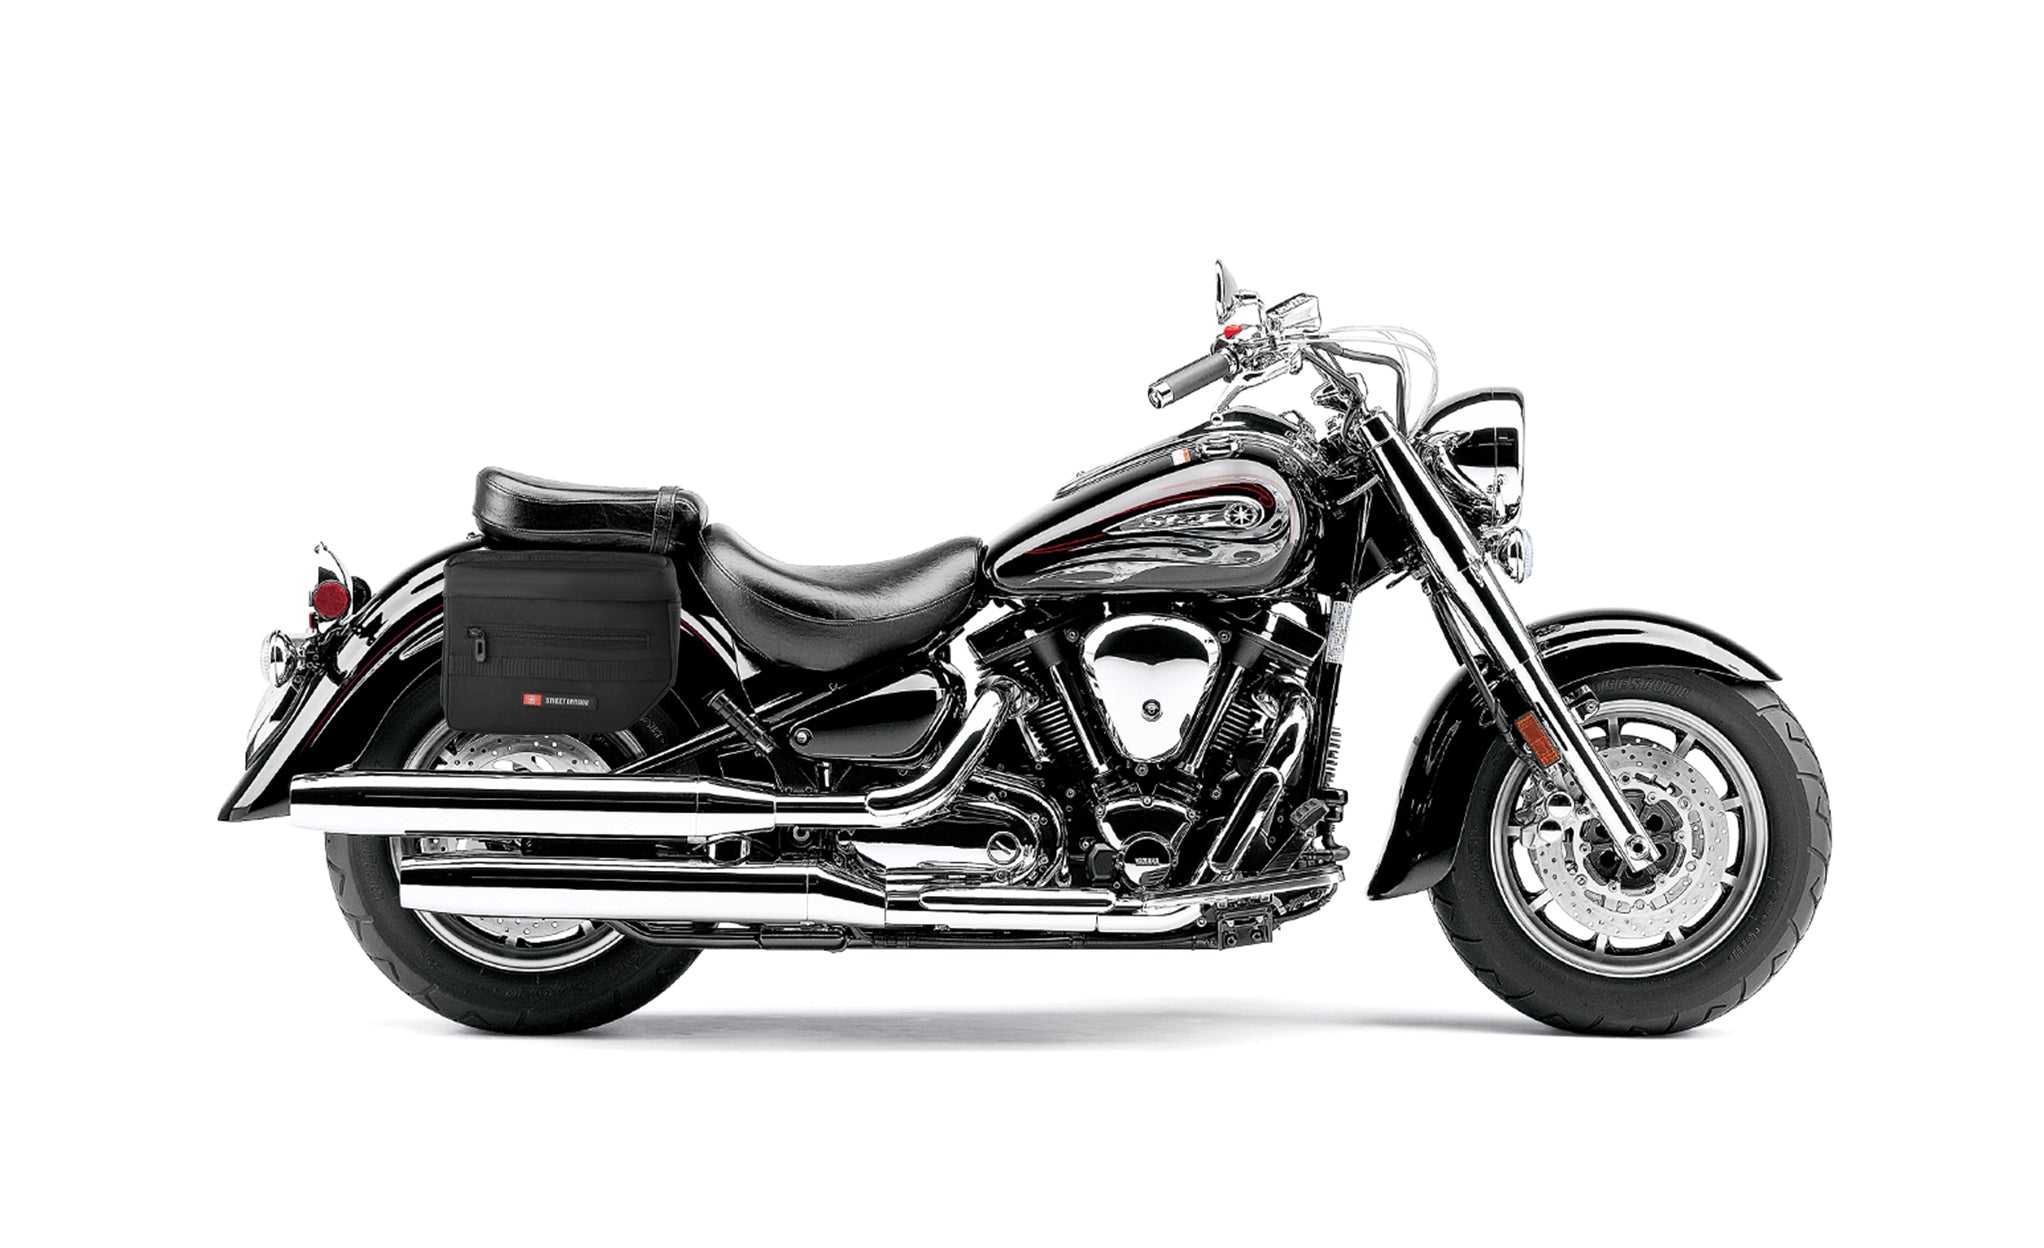 Viking Patriot Small Yamaha Road Star S Midnight Motorcycle Throw Over Saddlebags on Bike Photo @expand